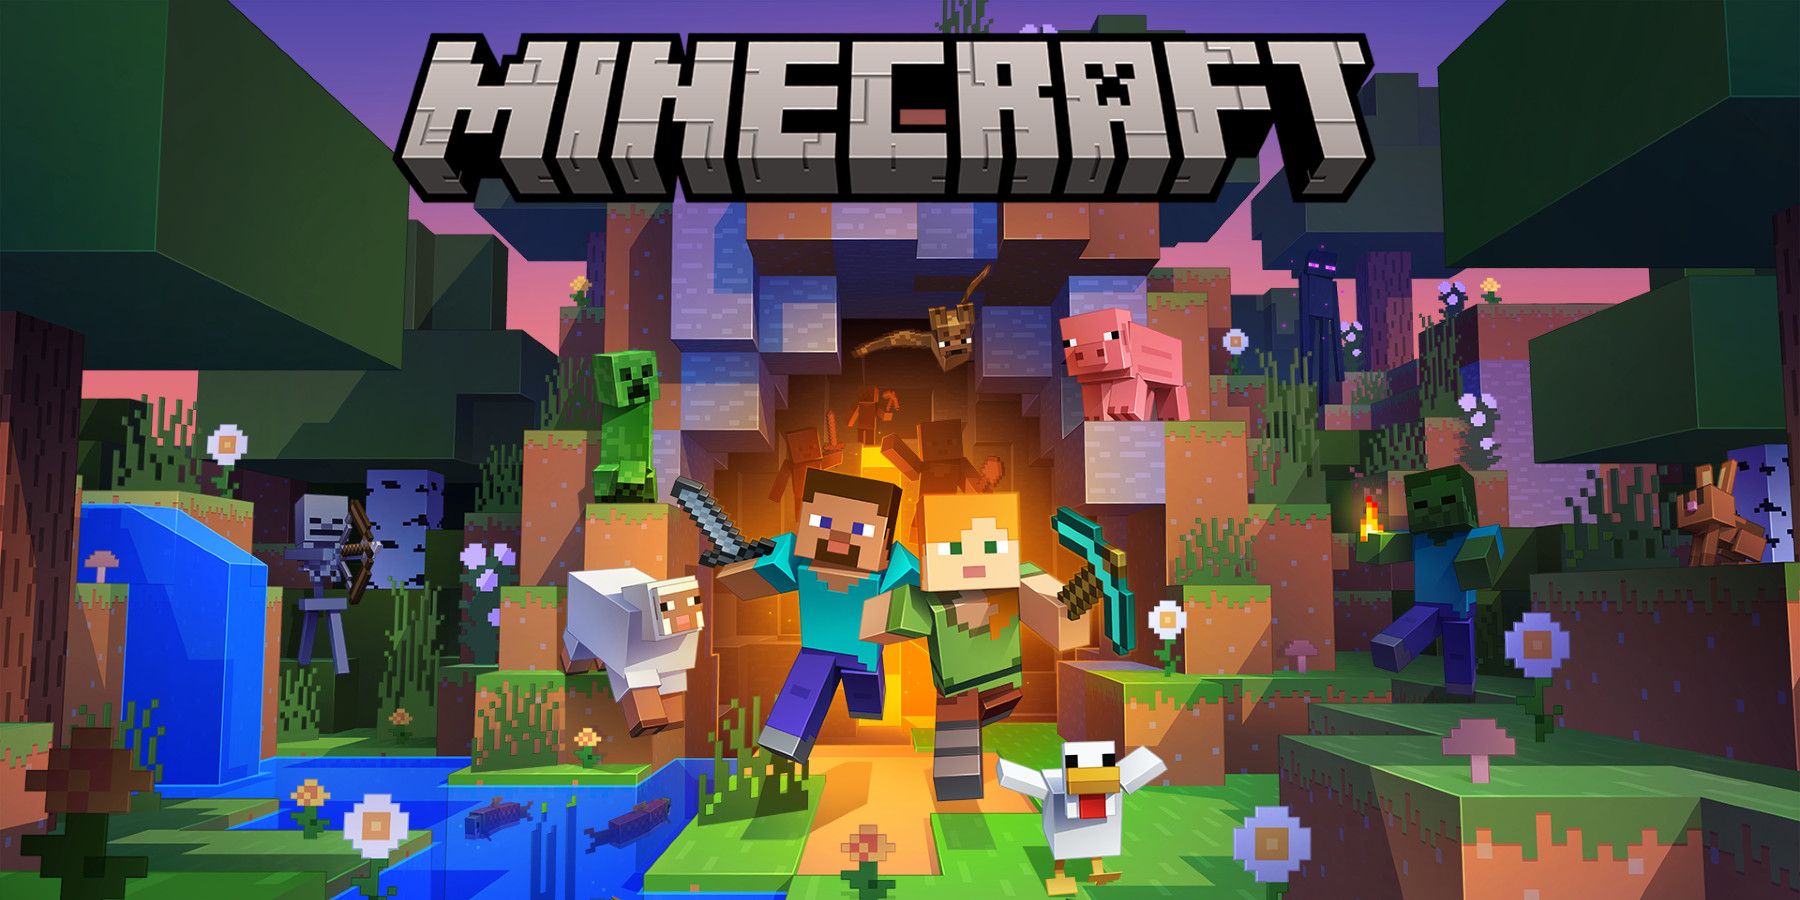 Minecraft can bring out holiday creativity and bring friends and family together